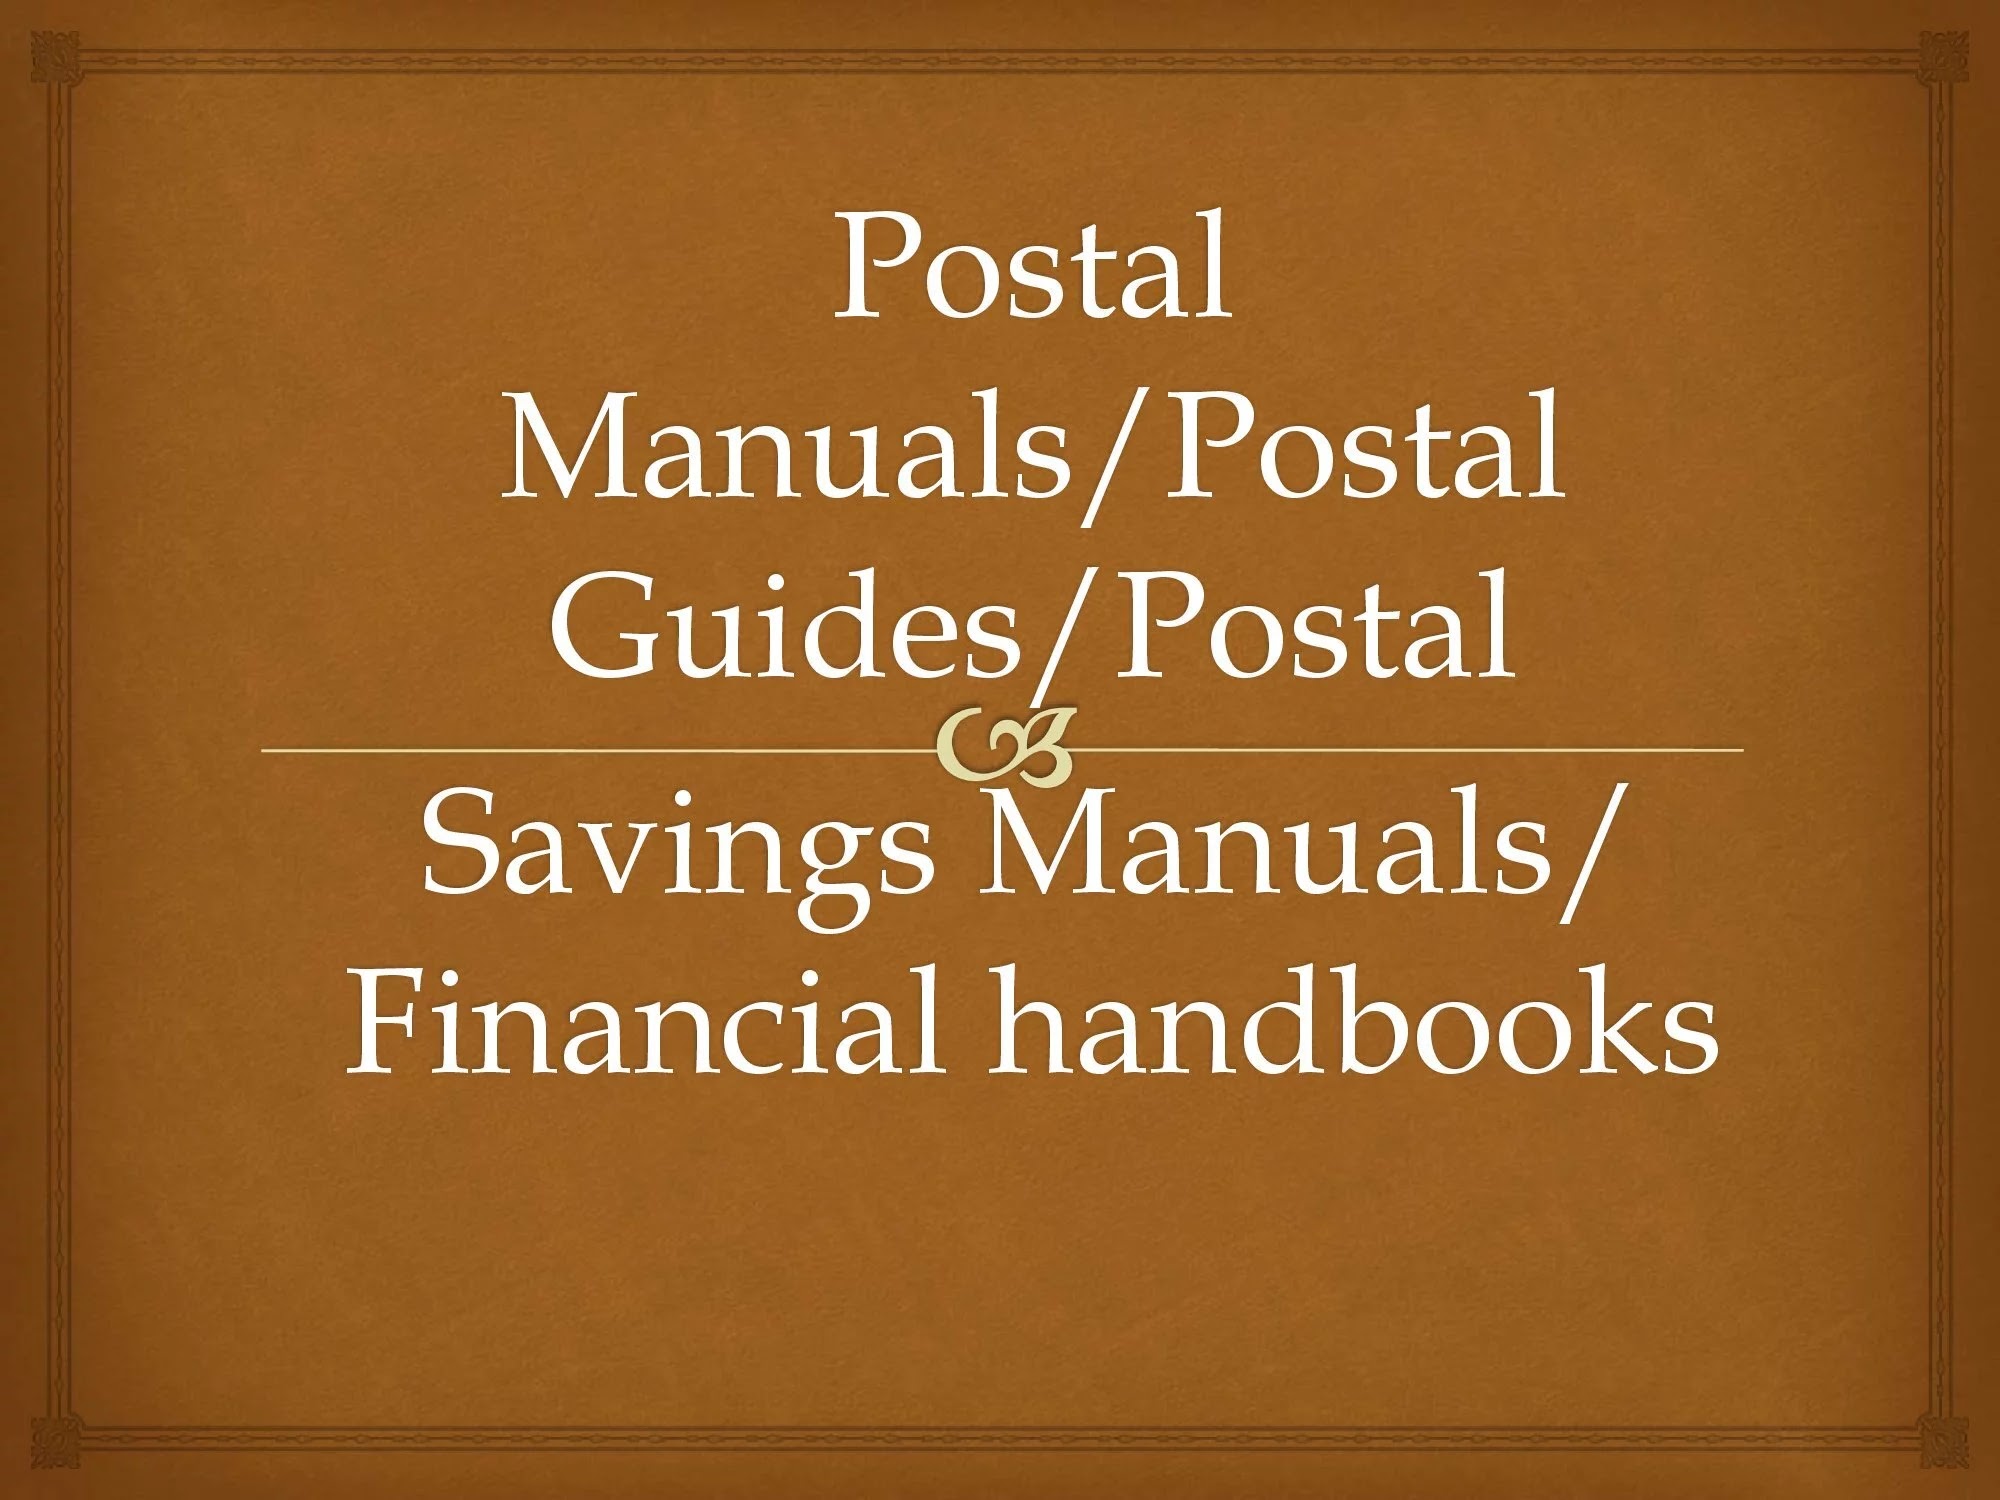 Postal Manuals of India Post | All Postal Manuals/Hand Books/Guides at One  Place | Brief Information about postal manuals and postal guides | Useful  for Postal Exams - Postalstudy | Post Office